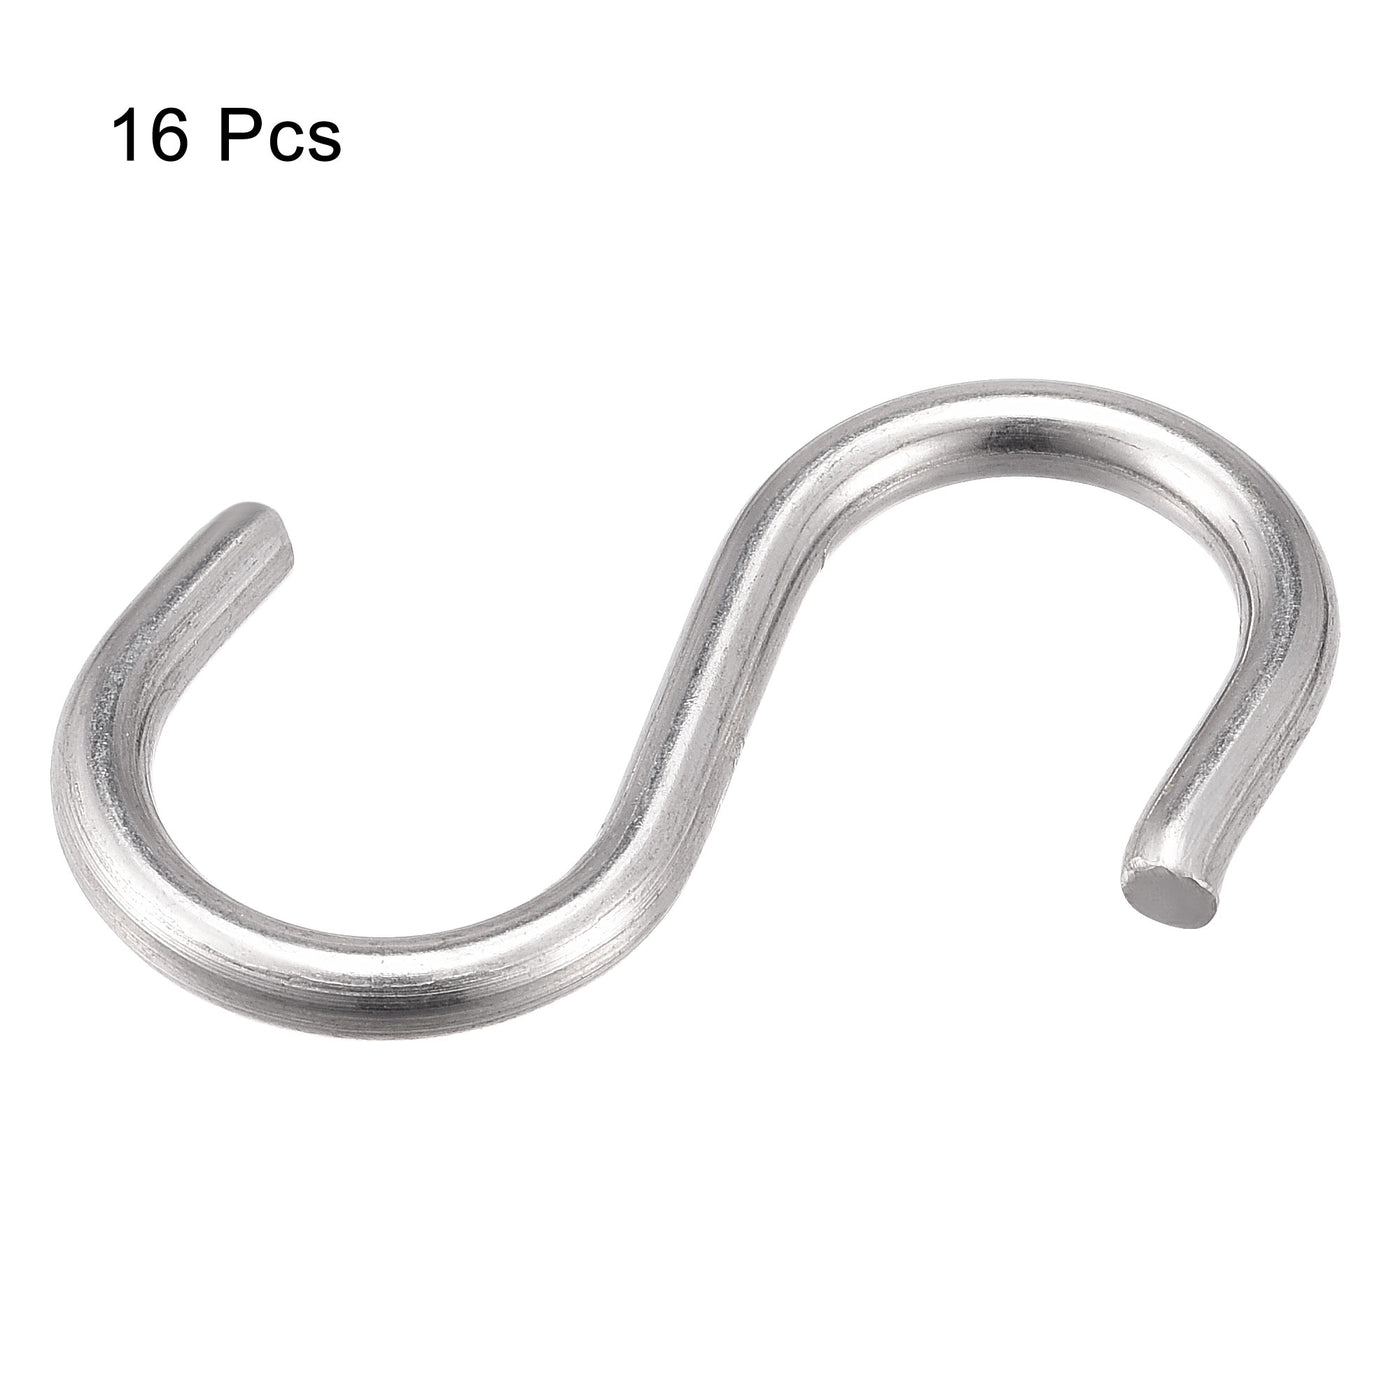 uxcell Uxcell S Hooks Stainless Steel Hanger for Hanging Objects in Kitchen, Garden, Bathroom, Garage